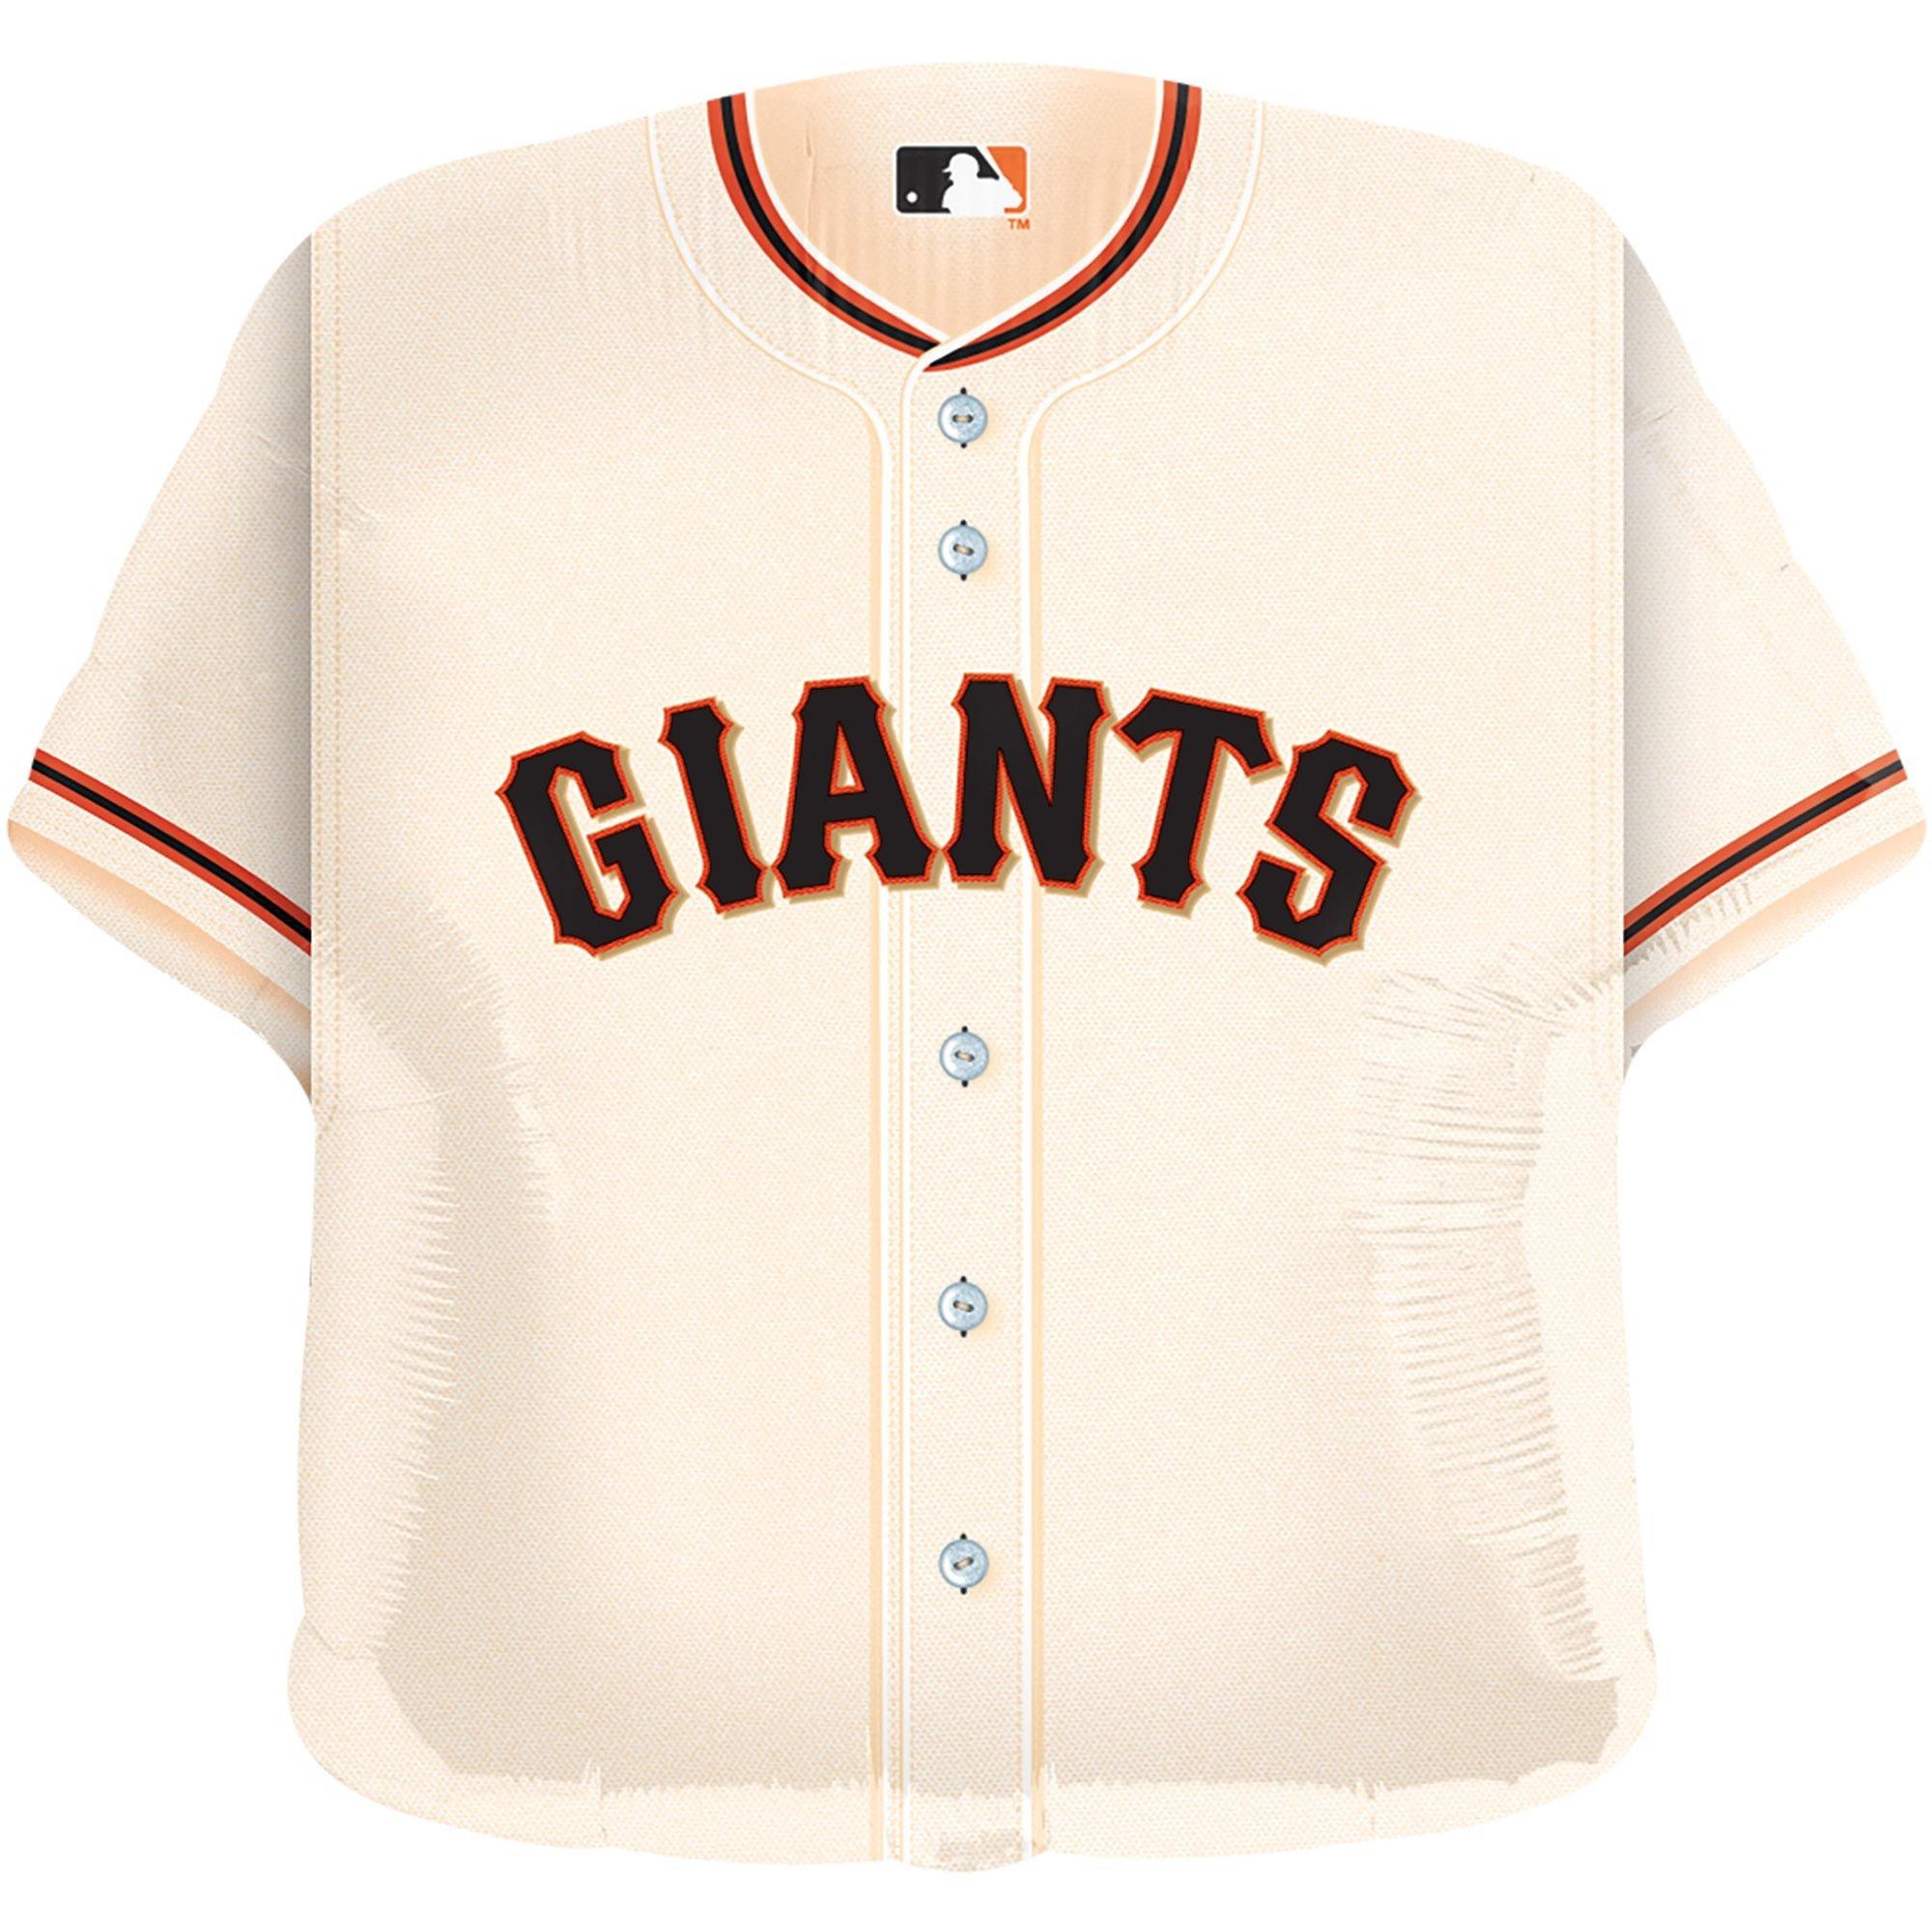 San Francisco Giants unveil new jerseys, and some fans are not